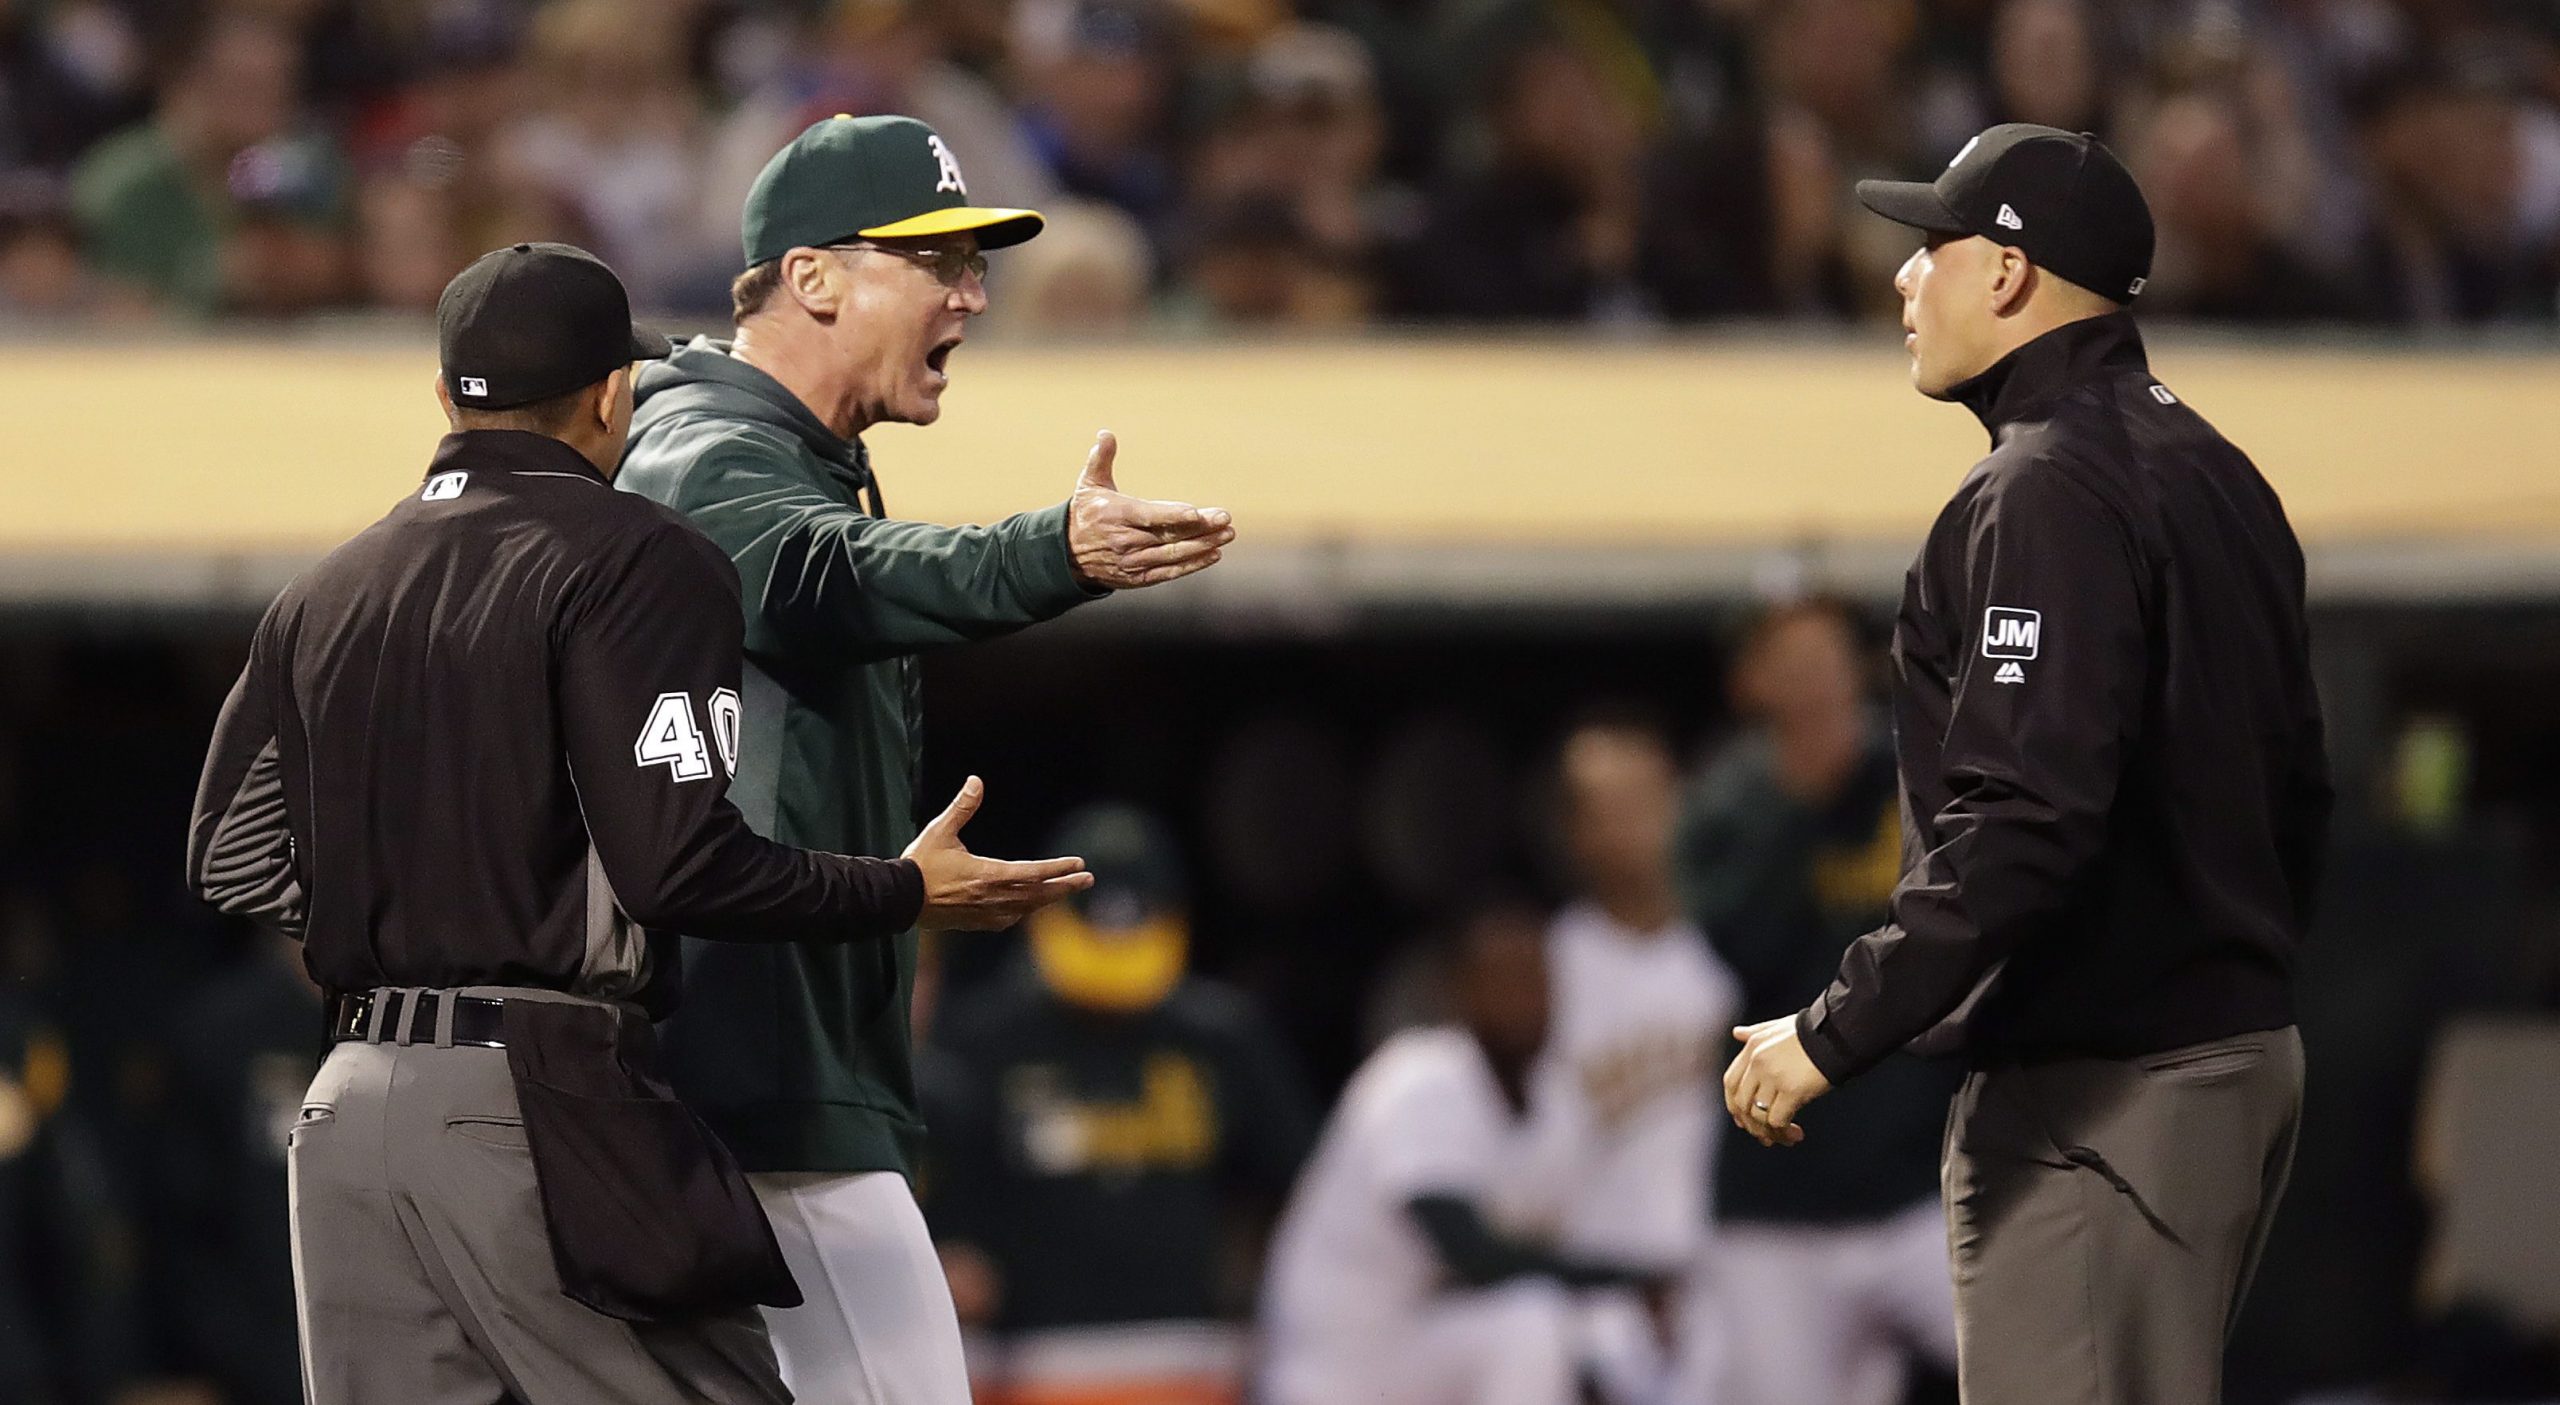 Oakland-Athletics-manager-Bob-Melvin,-second-from-left,-speaks-with-third-base-umpire-Stu-Scheurwater,-right,-and-home-plate-umpire-Roberto-Ortiz,-left,-duripng-the-fifth-inning-of-the-team's-baseball-game-against-the-Houston-Astros-on-Saturday,-June-1,-2019,-in-Oakland,-Calif.-(AP-Photo/Ben-Margot)